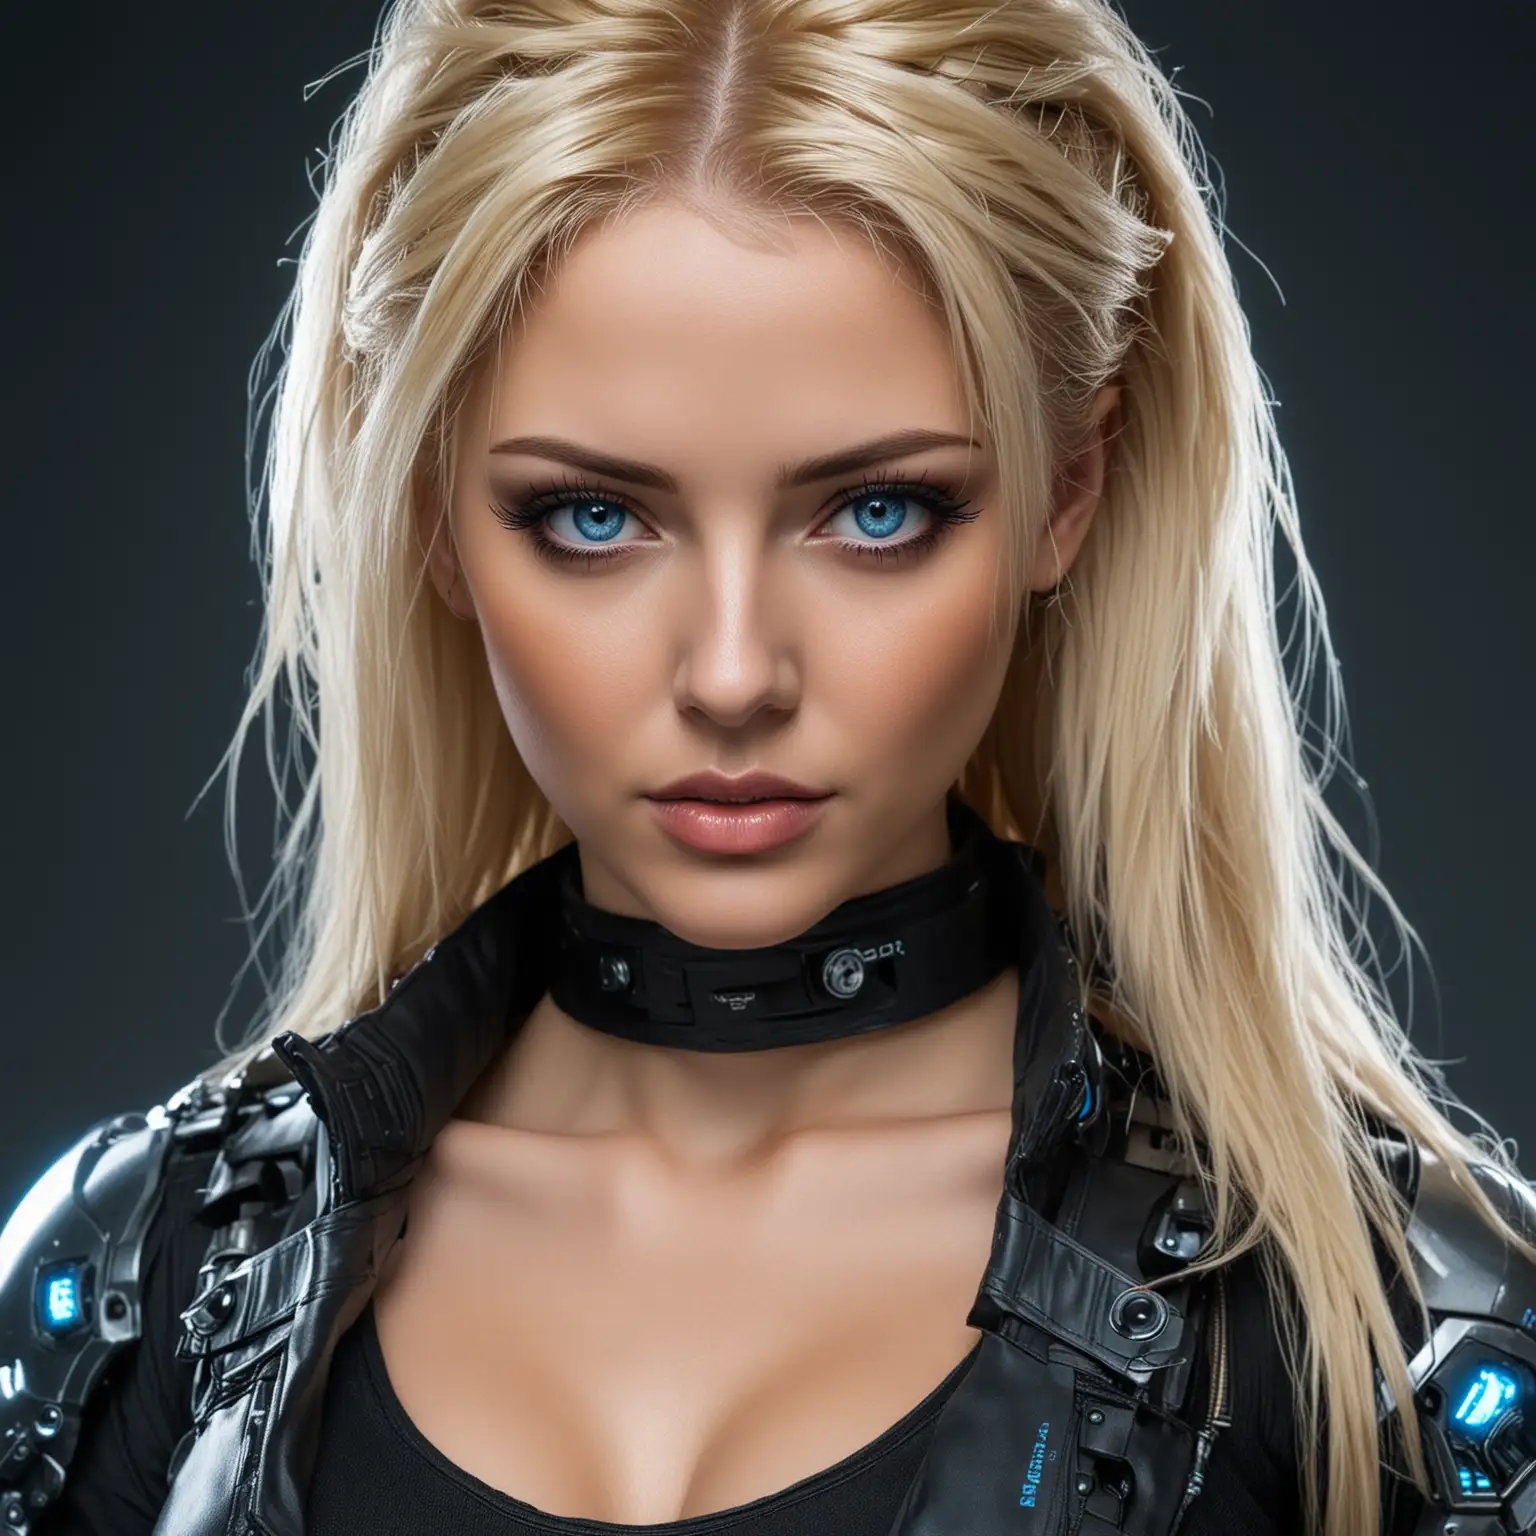 Stylish Cyberpunk Woman with Blonde Hair and Blue Eyes